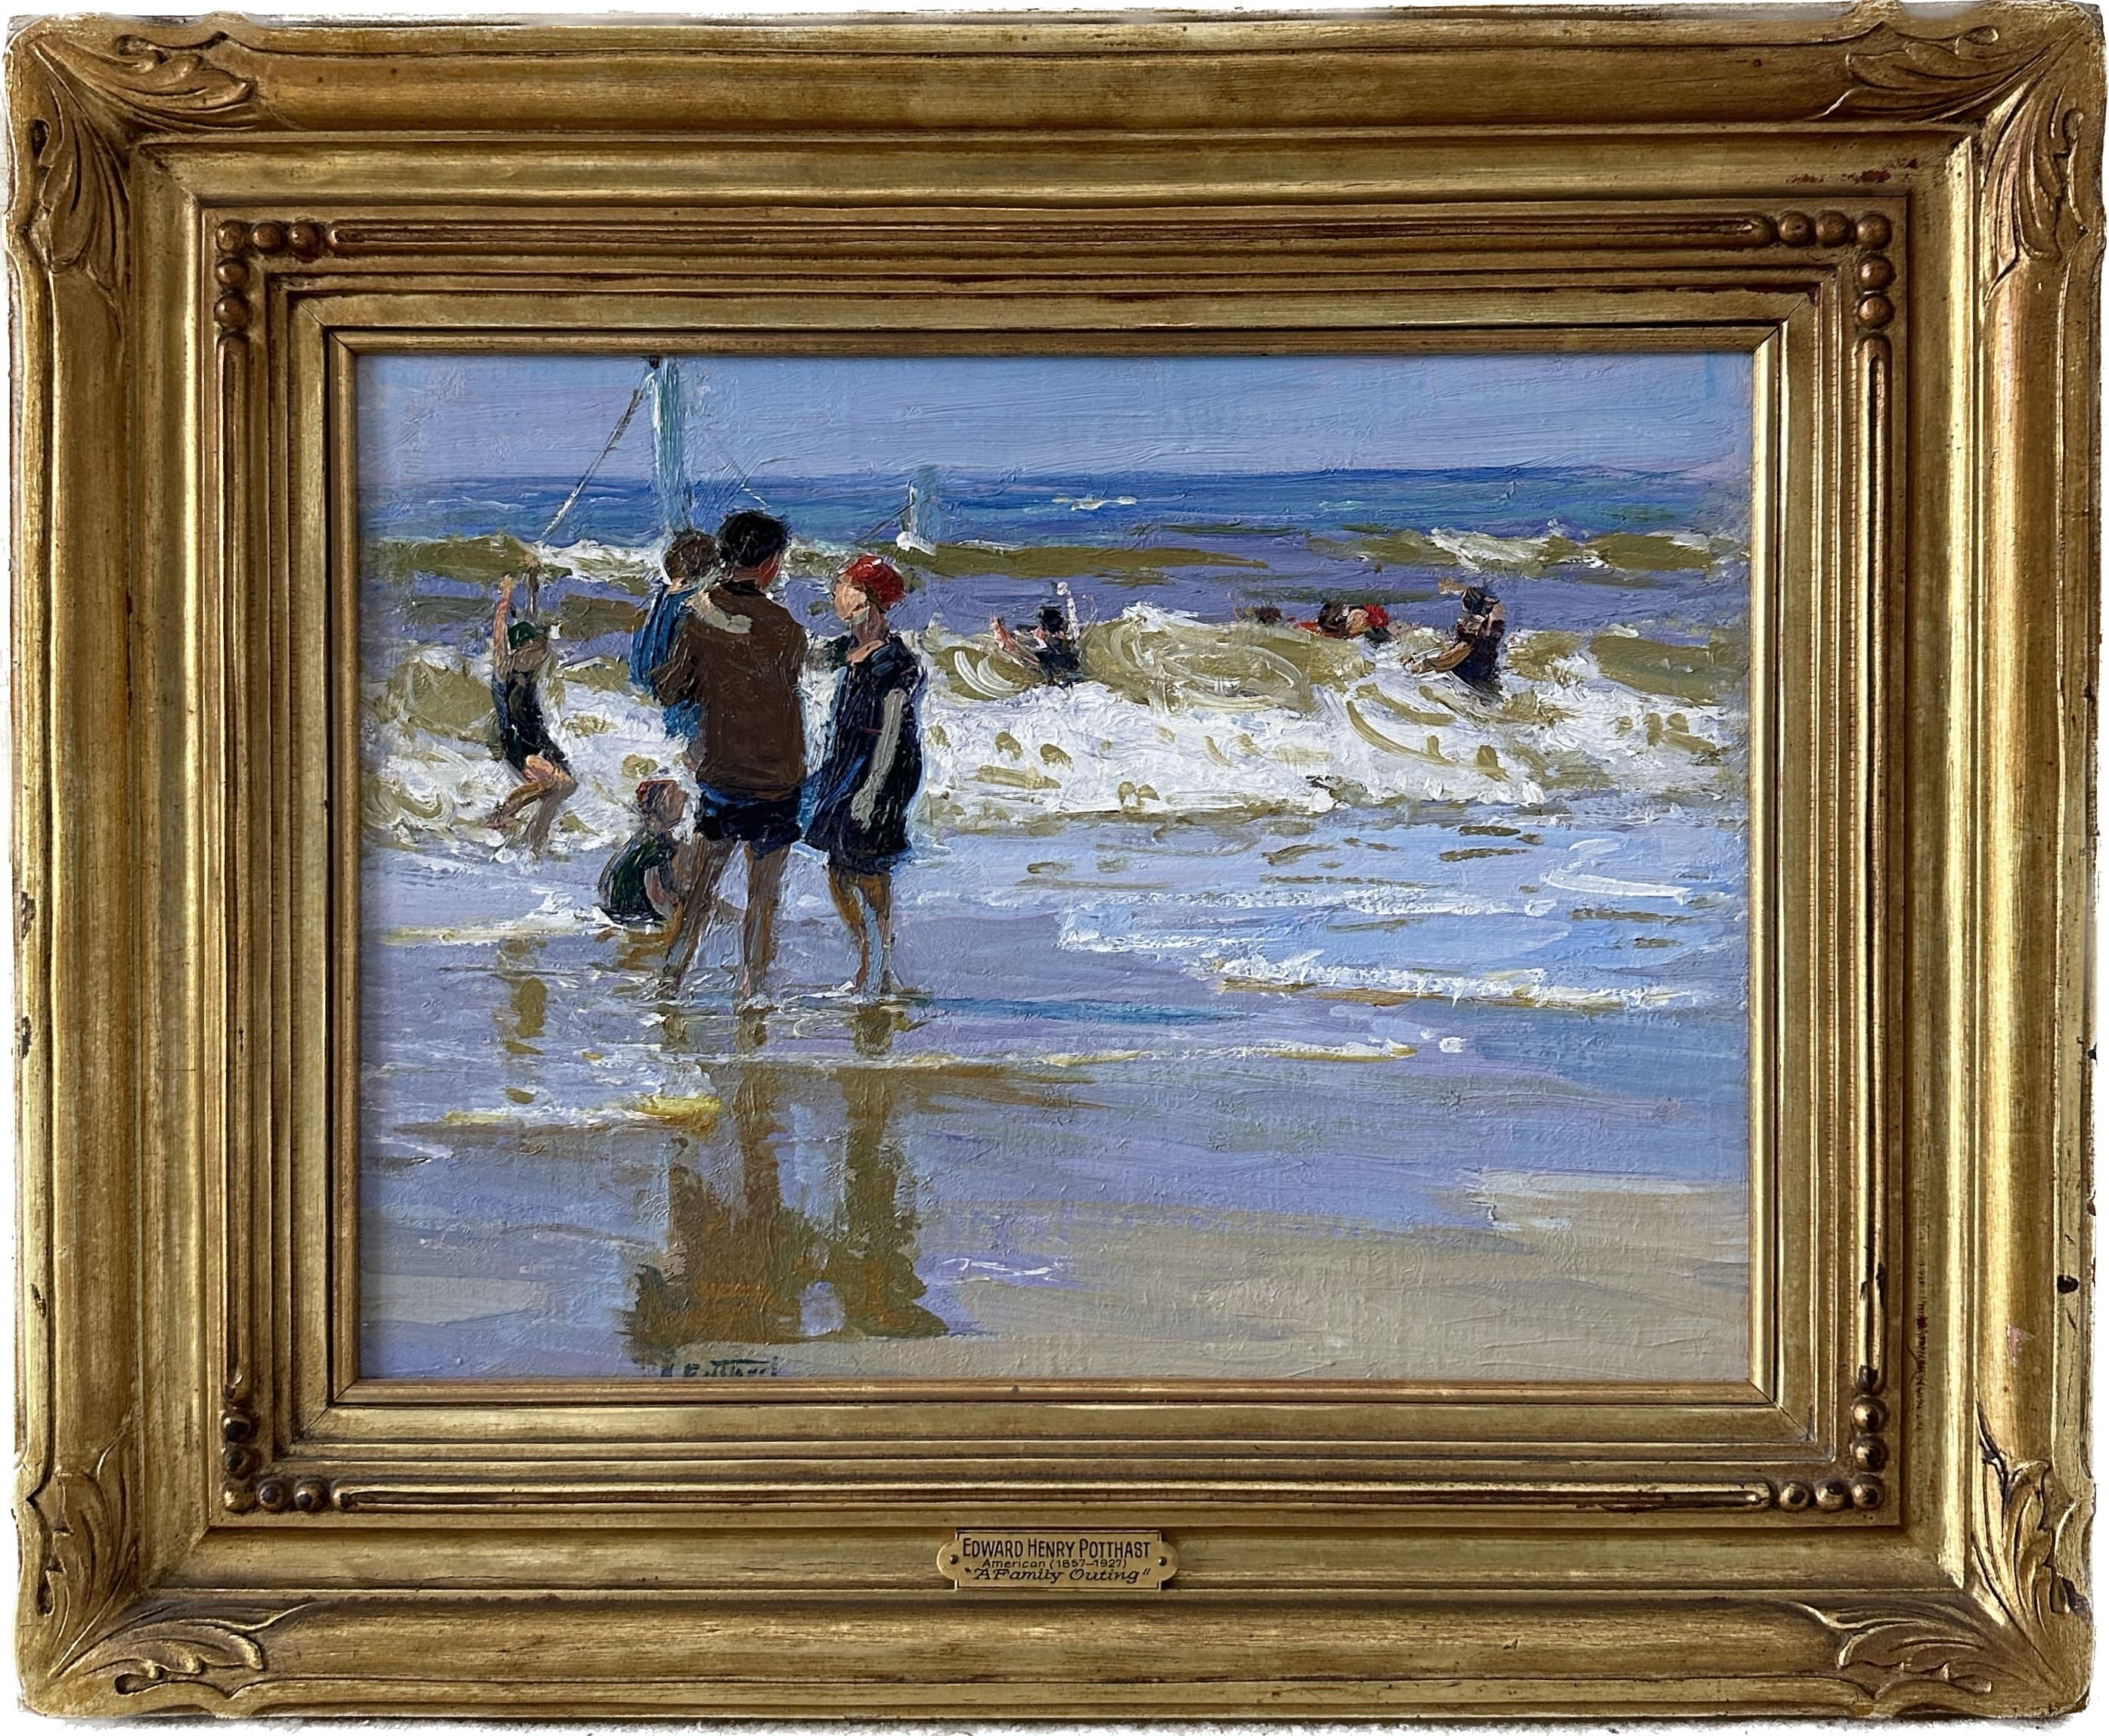 A Family Outing - Painting by Edward Henry Potthast